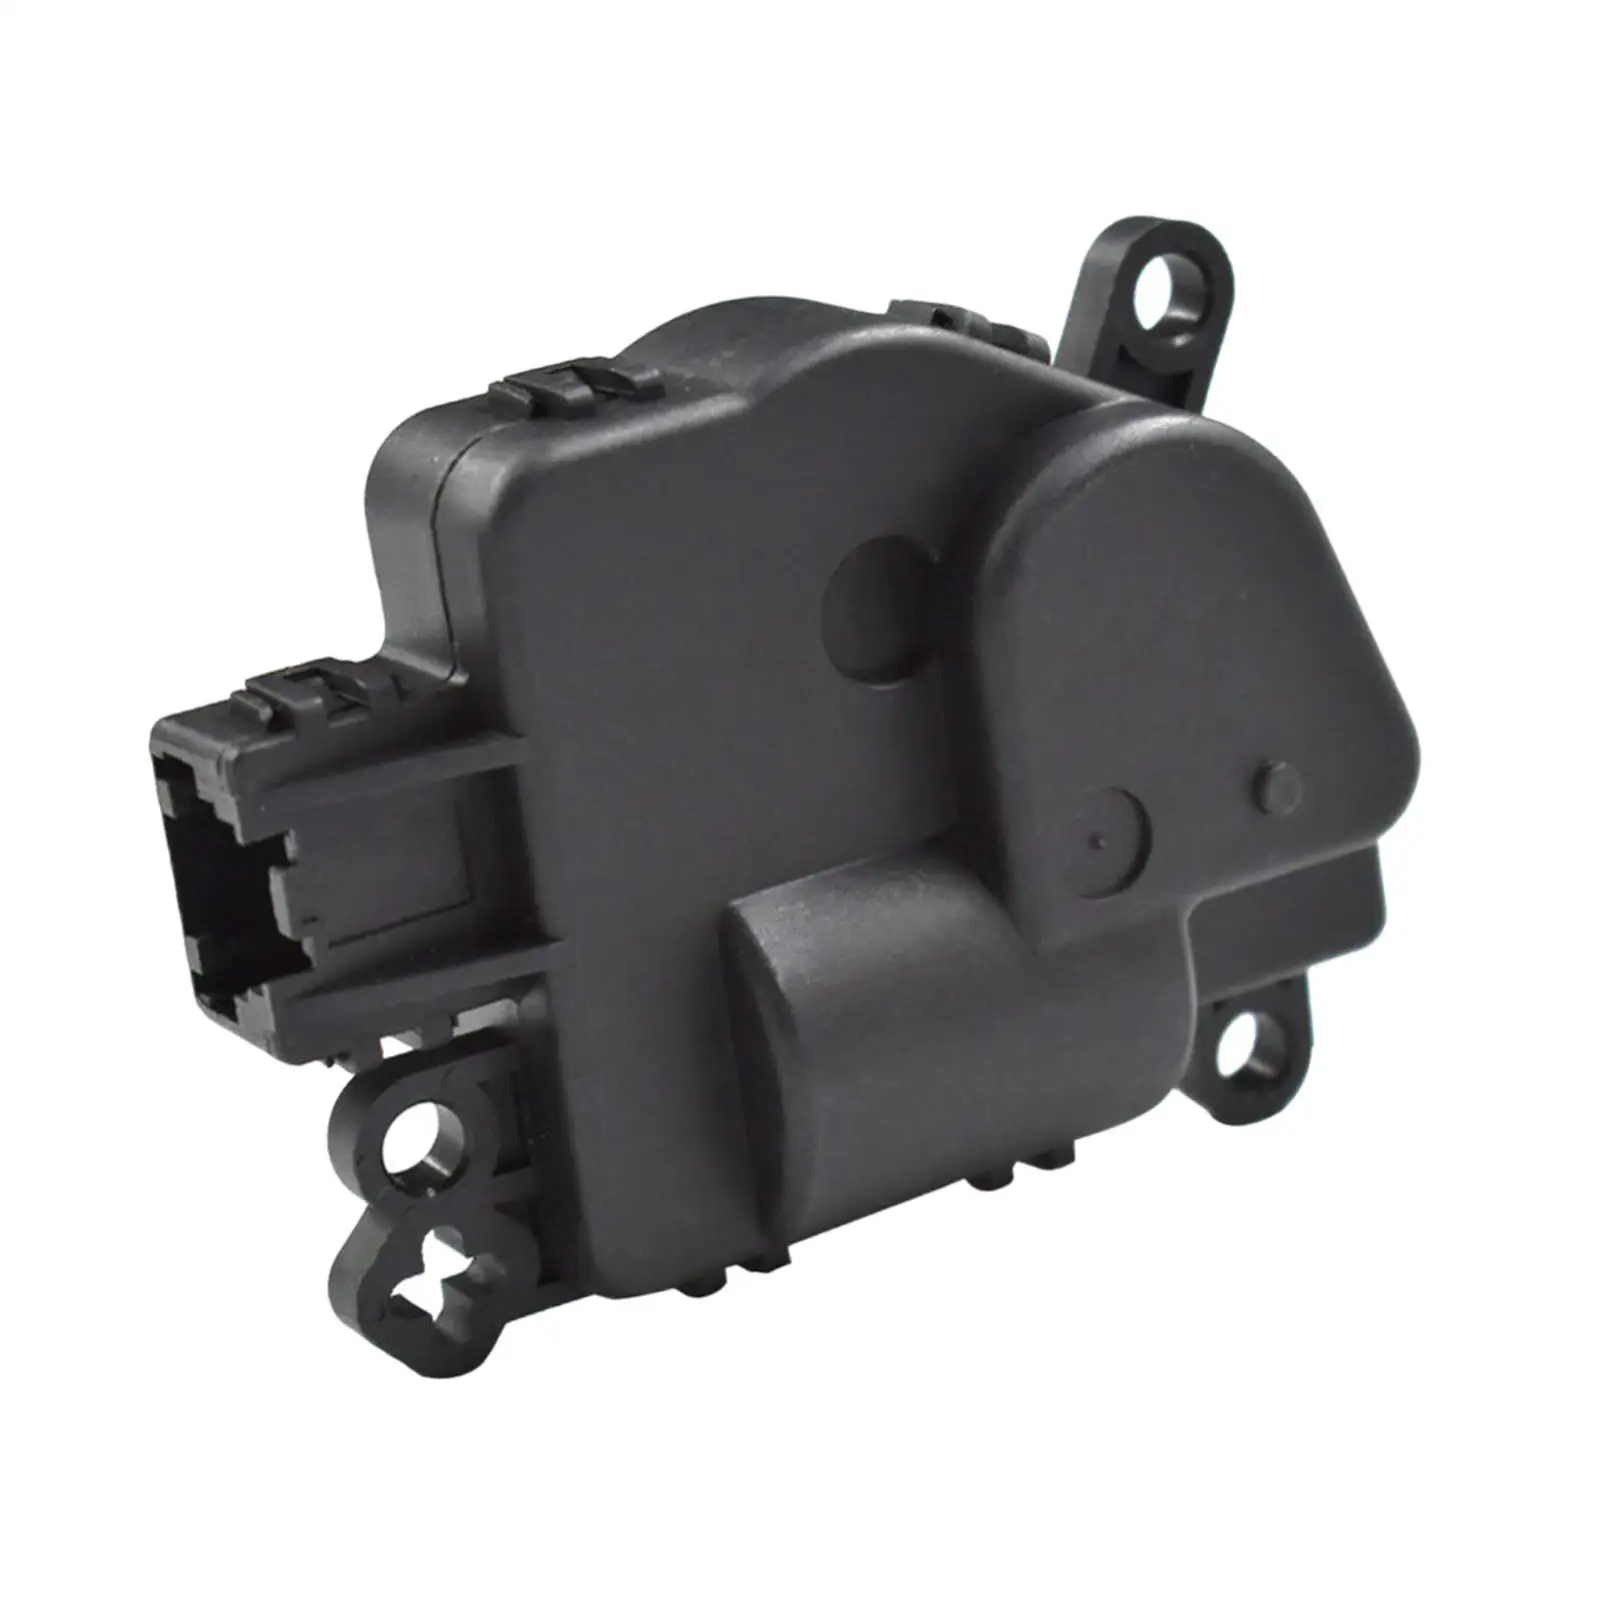 

Hvac Blend Door Actuator Replacements Engine Cooling & Climate Control Heater Actuator Fit for Chrysler Charger RAM